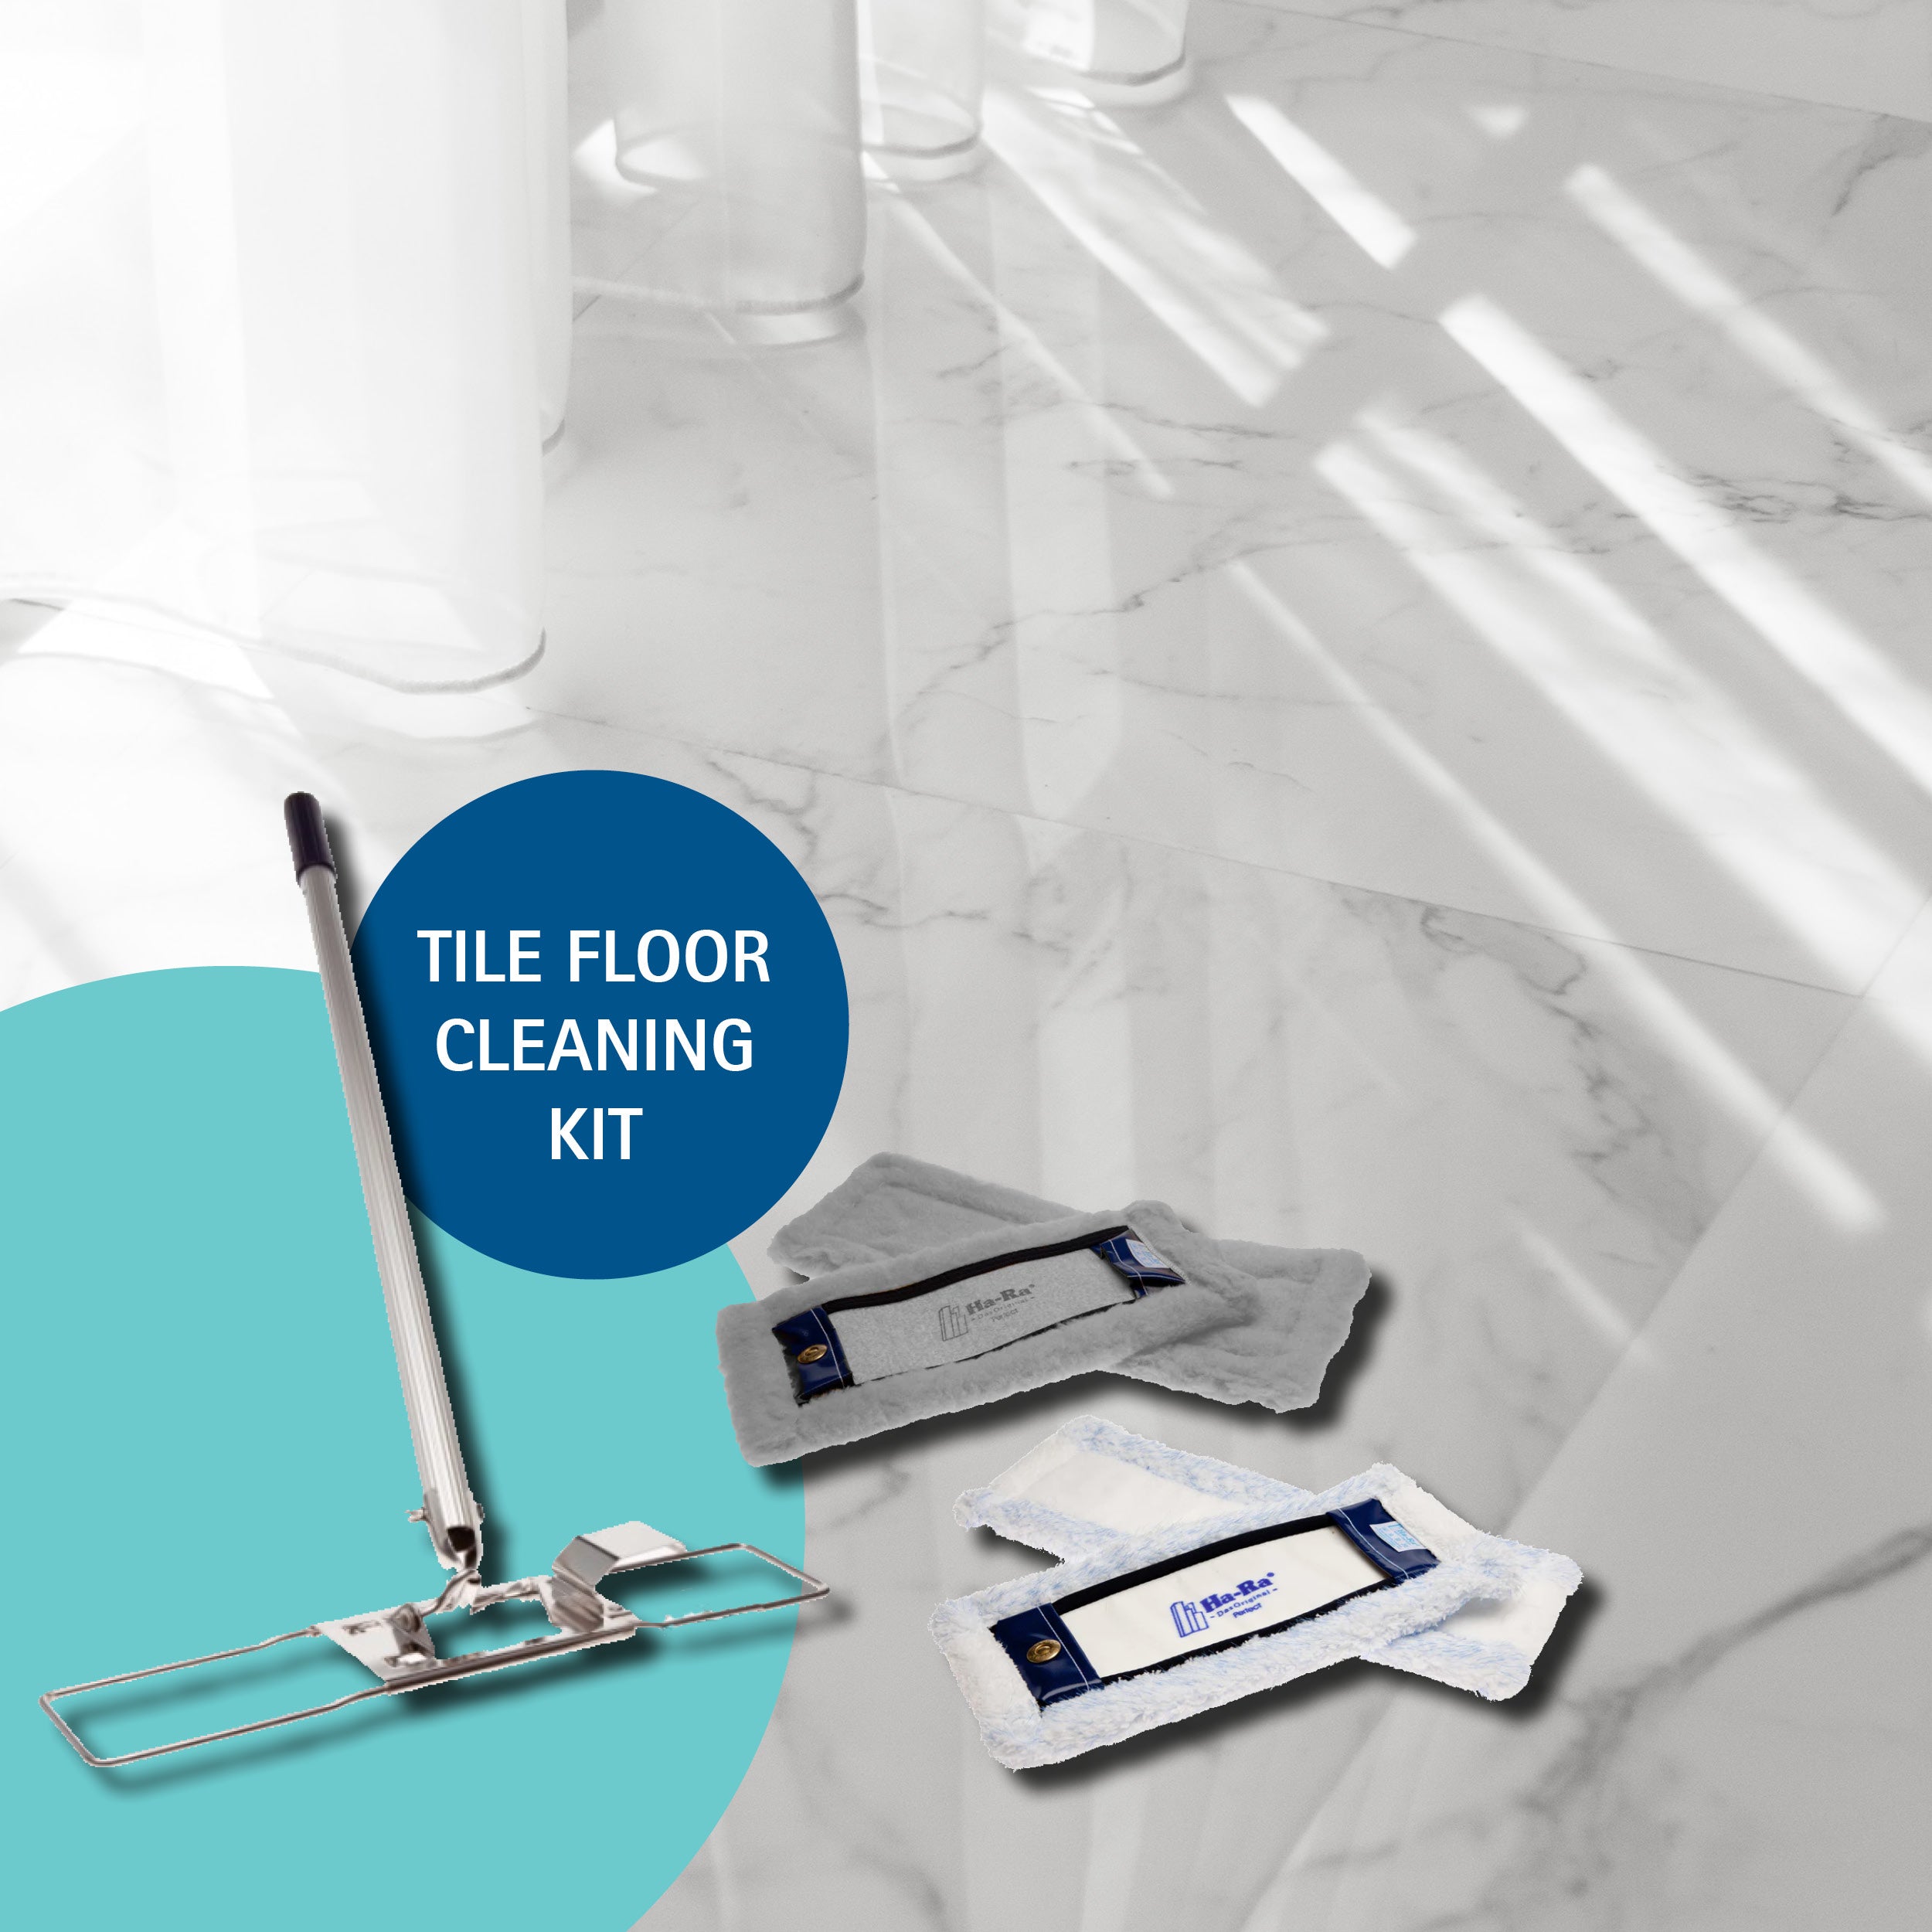 Keep your floors looking immaculate with our Tile Floor Cleaning Kit